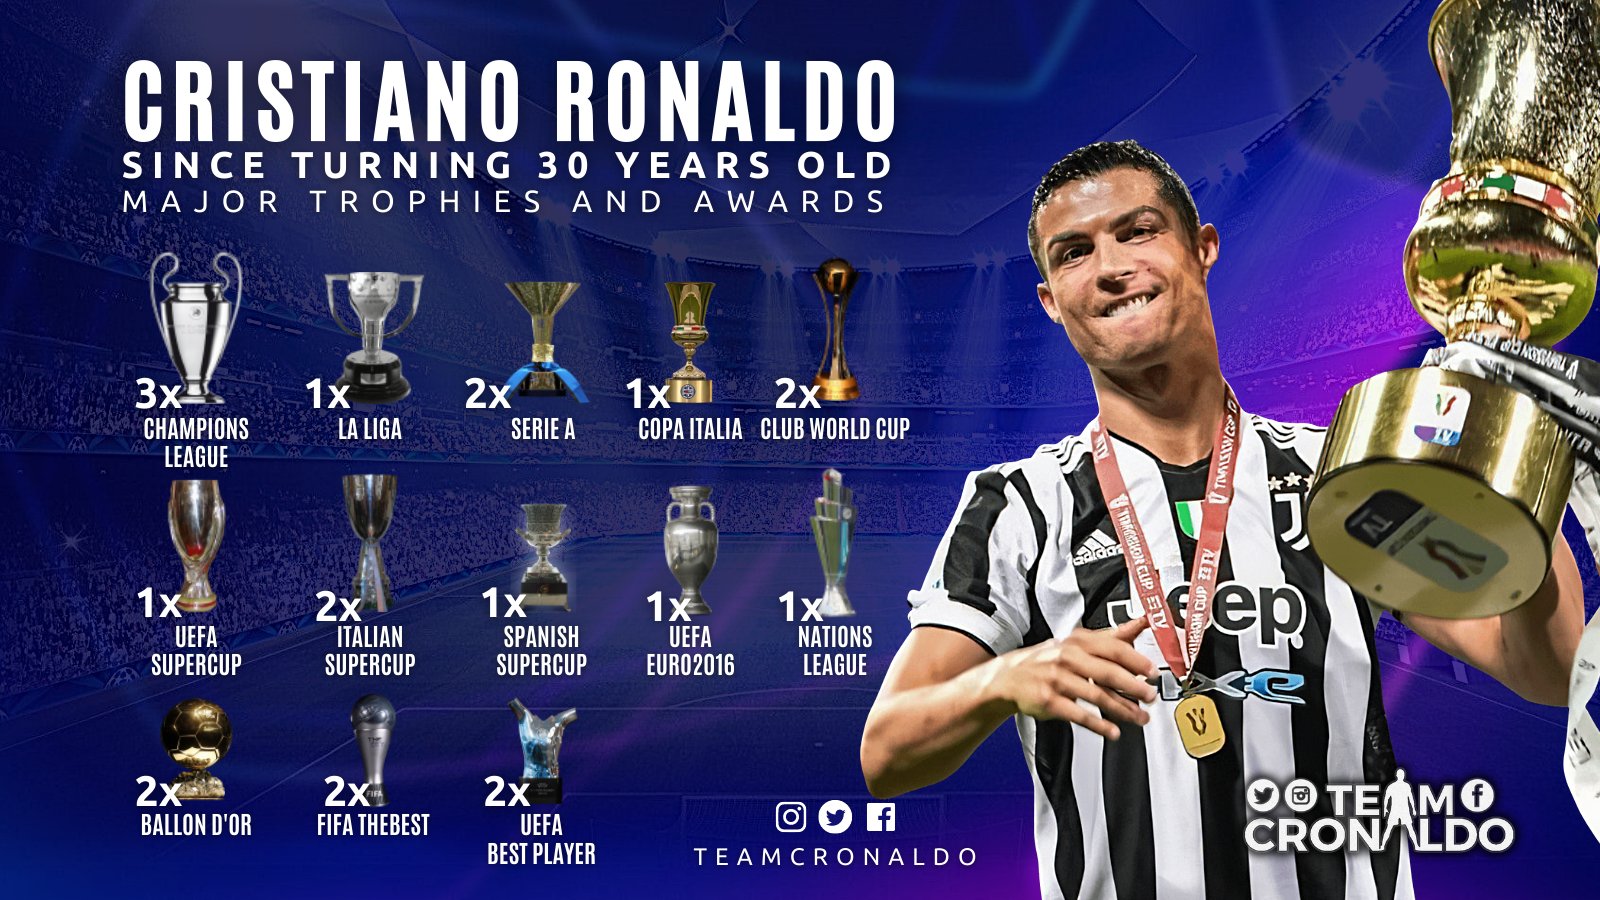 TCR. on Twitter: "🏆| Cristiano Ronaldo's trophies and awards since turning 30 years old. Spectacular! https://t.co/VaI4laRbkz" / Twitter